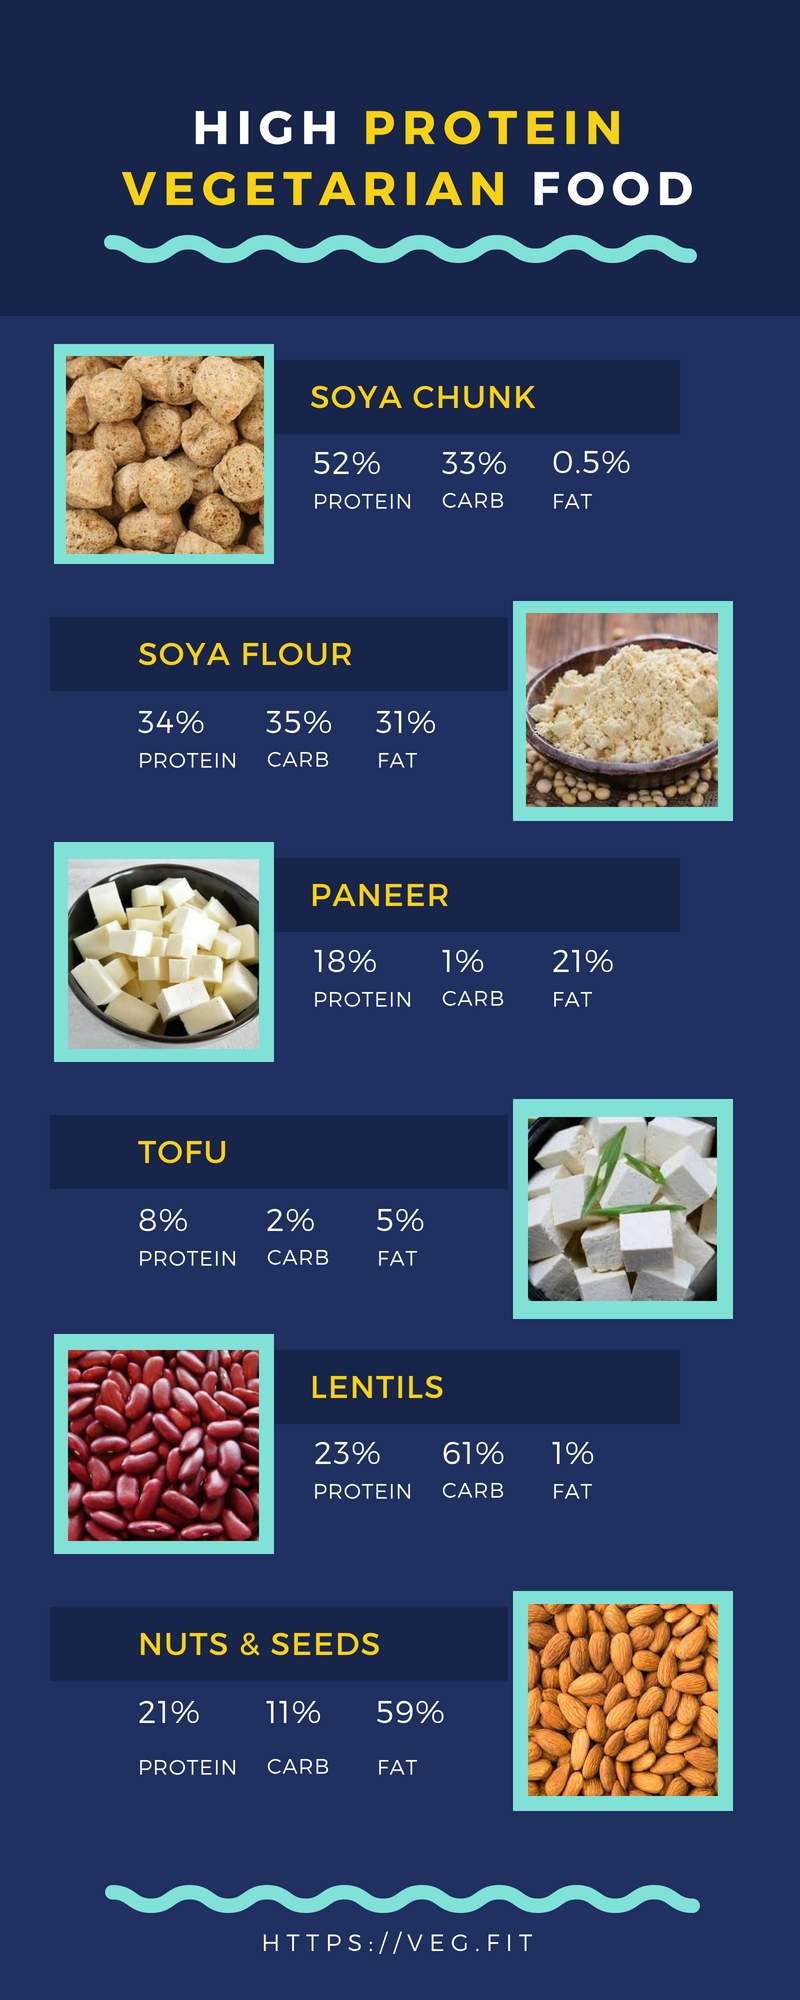 Infographic_High Protein Vegetarian Foods_VegFit